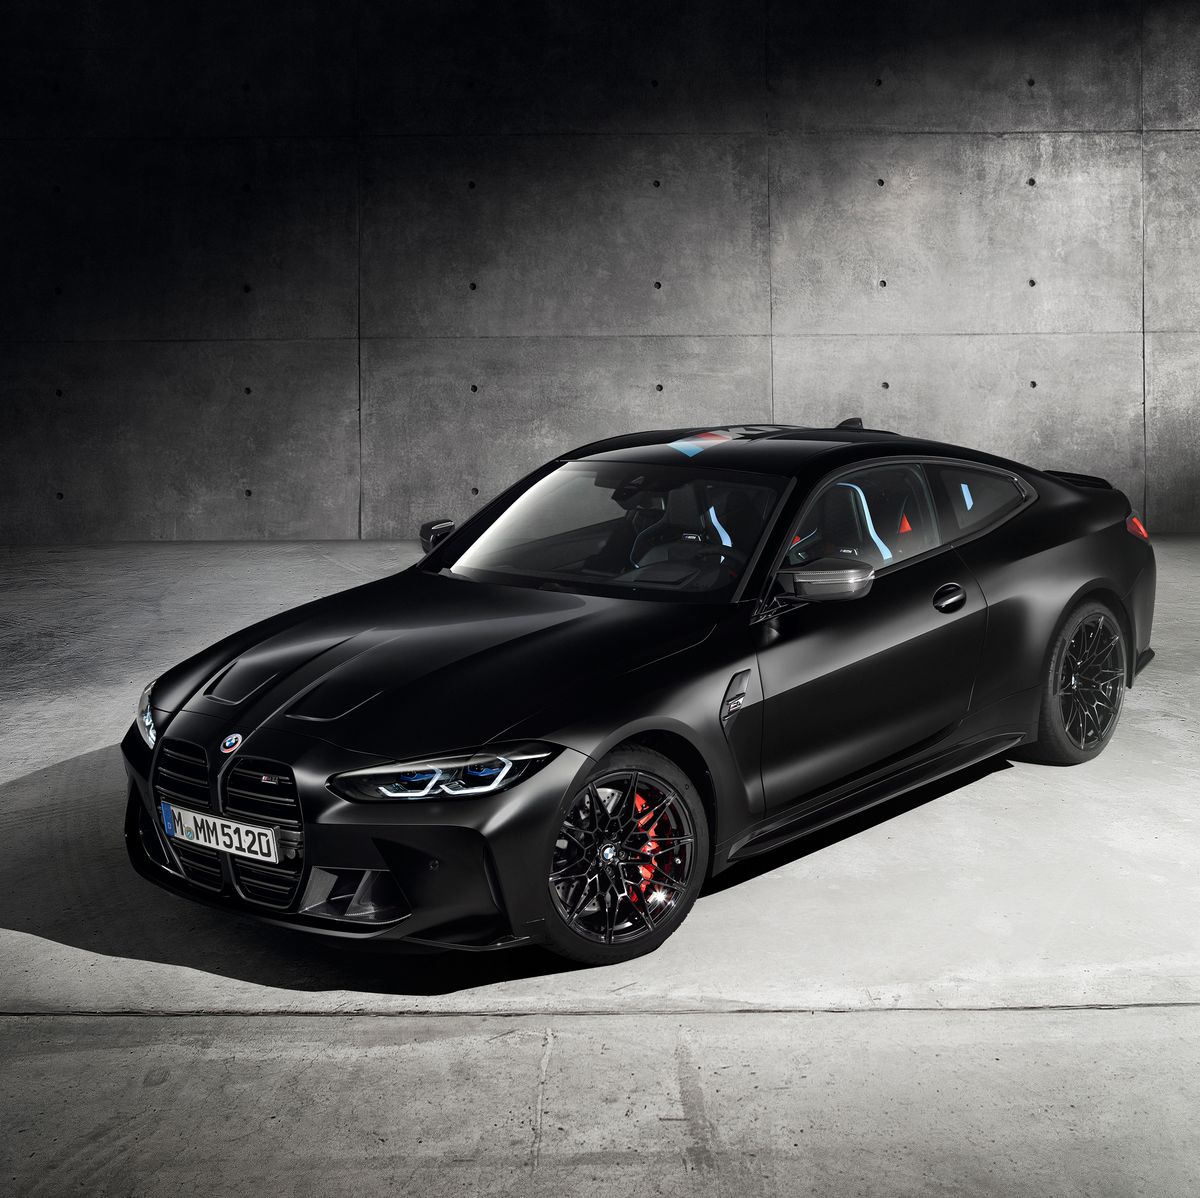 The 2022 BMW M4 By Kith is Surprisingly Alright